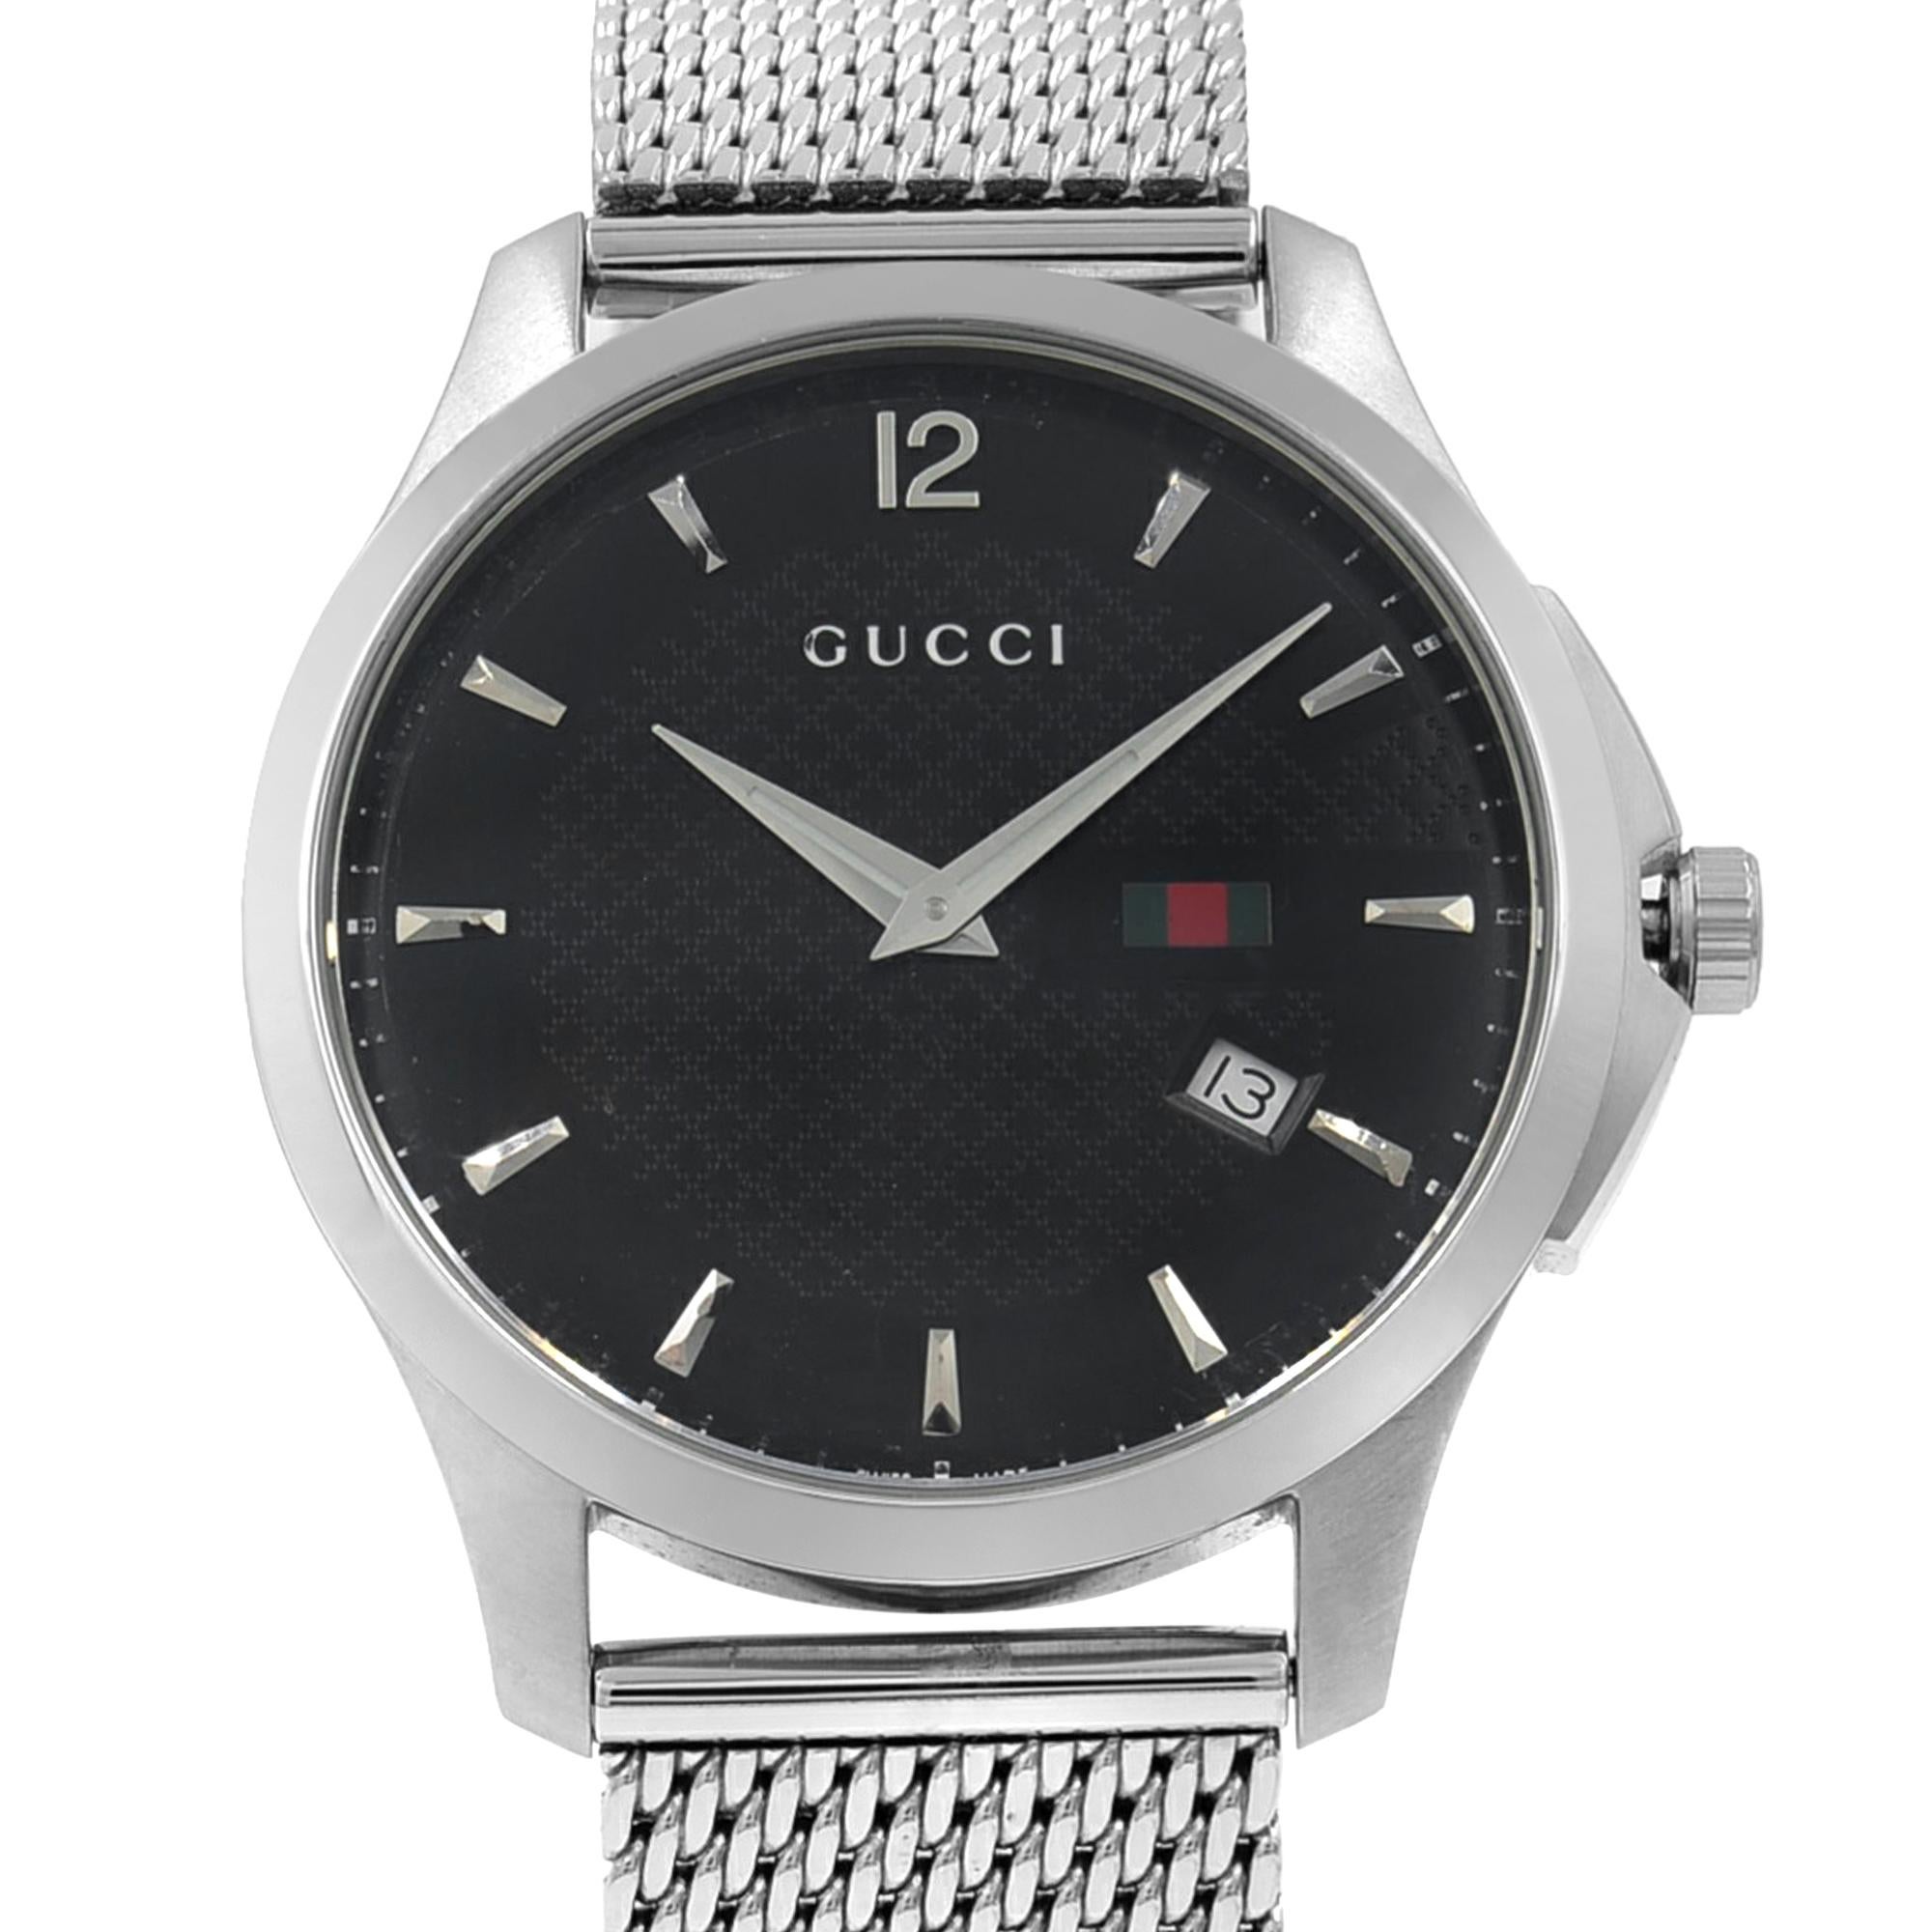 Pre-owned Gucci G-Timeless Mens Watch YA126308. The Back Case Shows Some Scratches. No Original Box and Papers are Included. Comes with Chronostore Presentation Box and Authenticity Card. Covered by 1-year Chronostore Warranty
Details:
MSRP